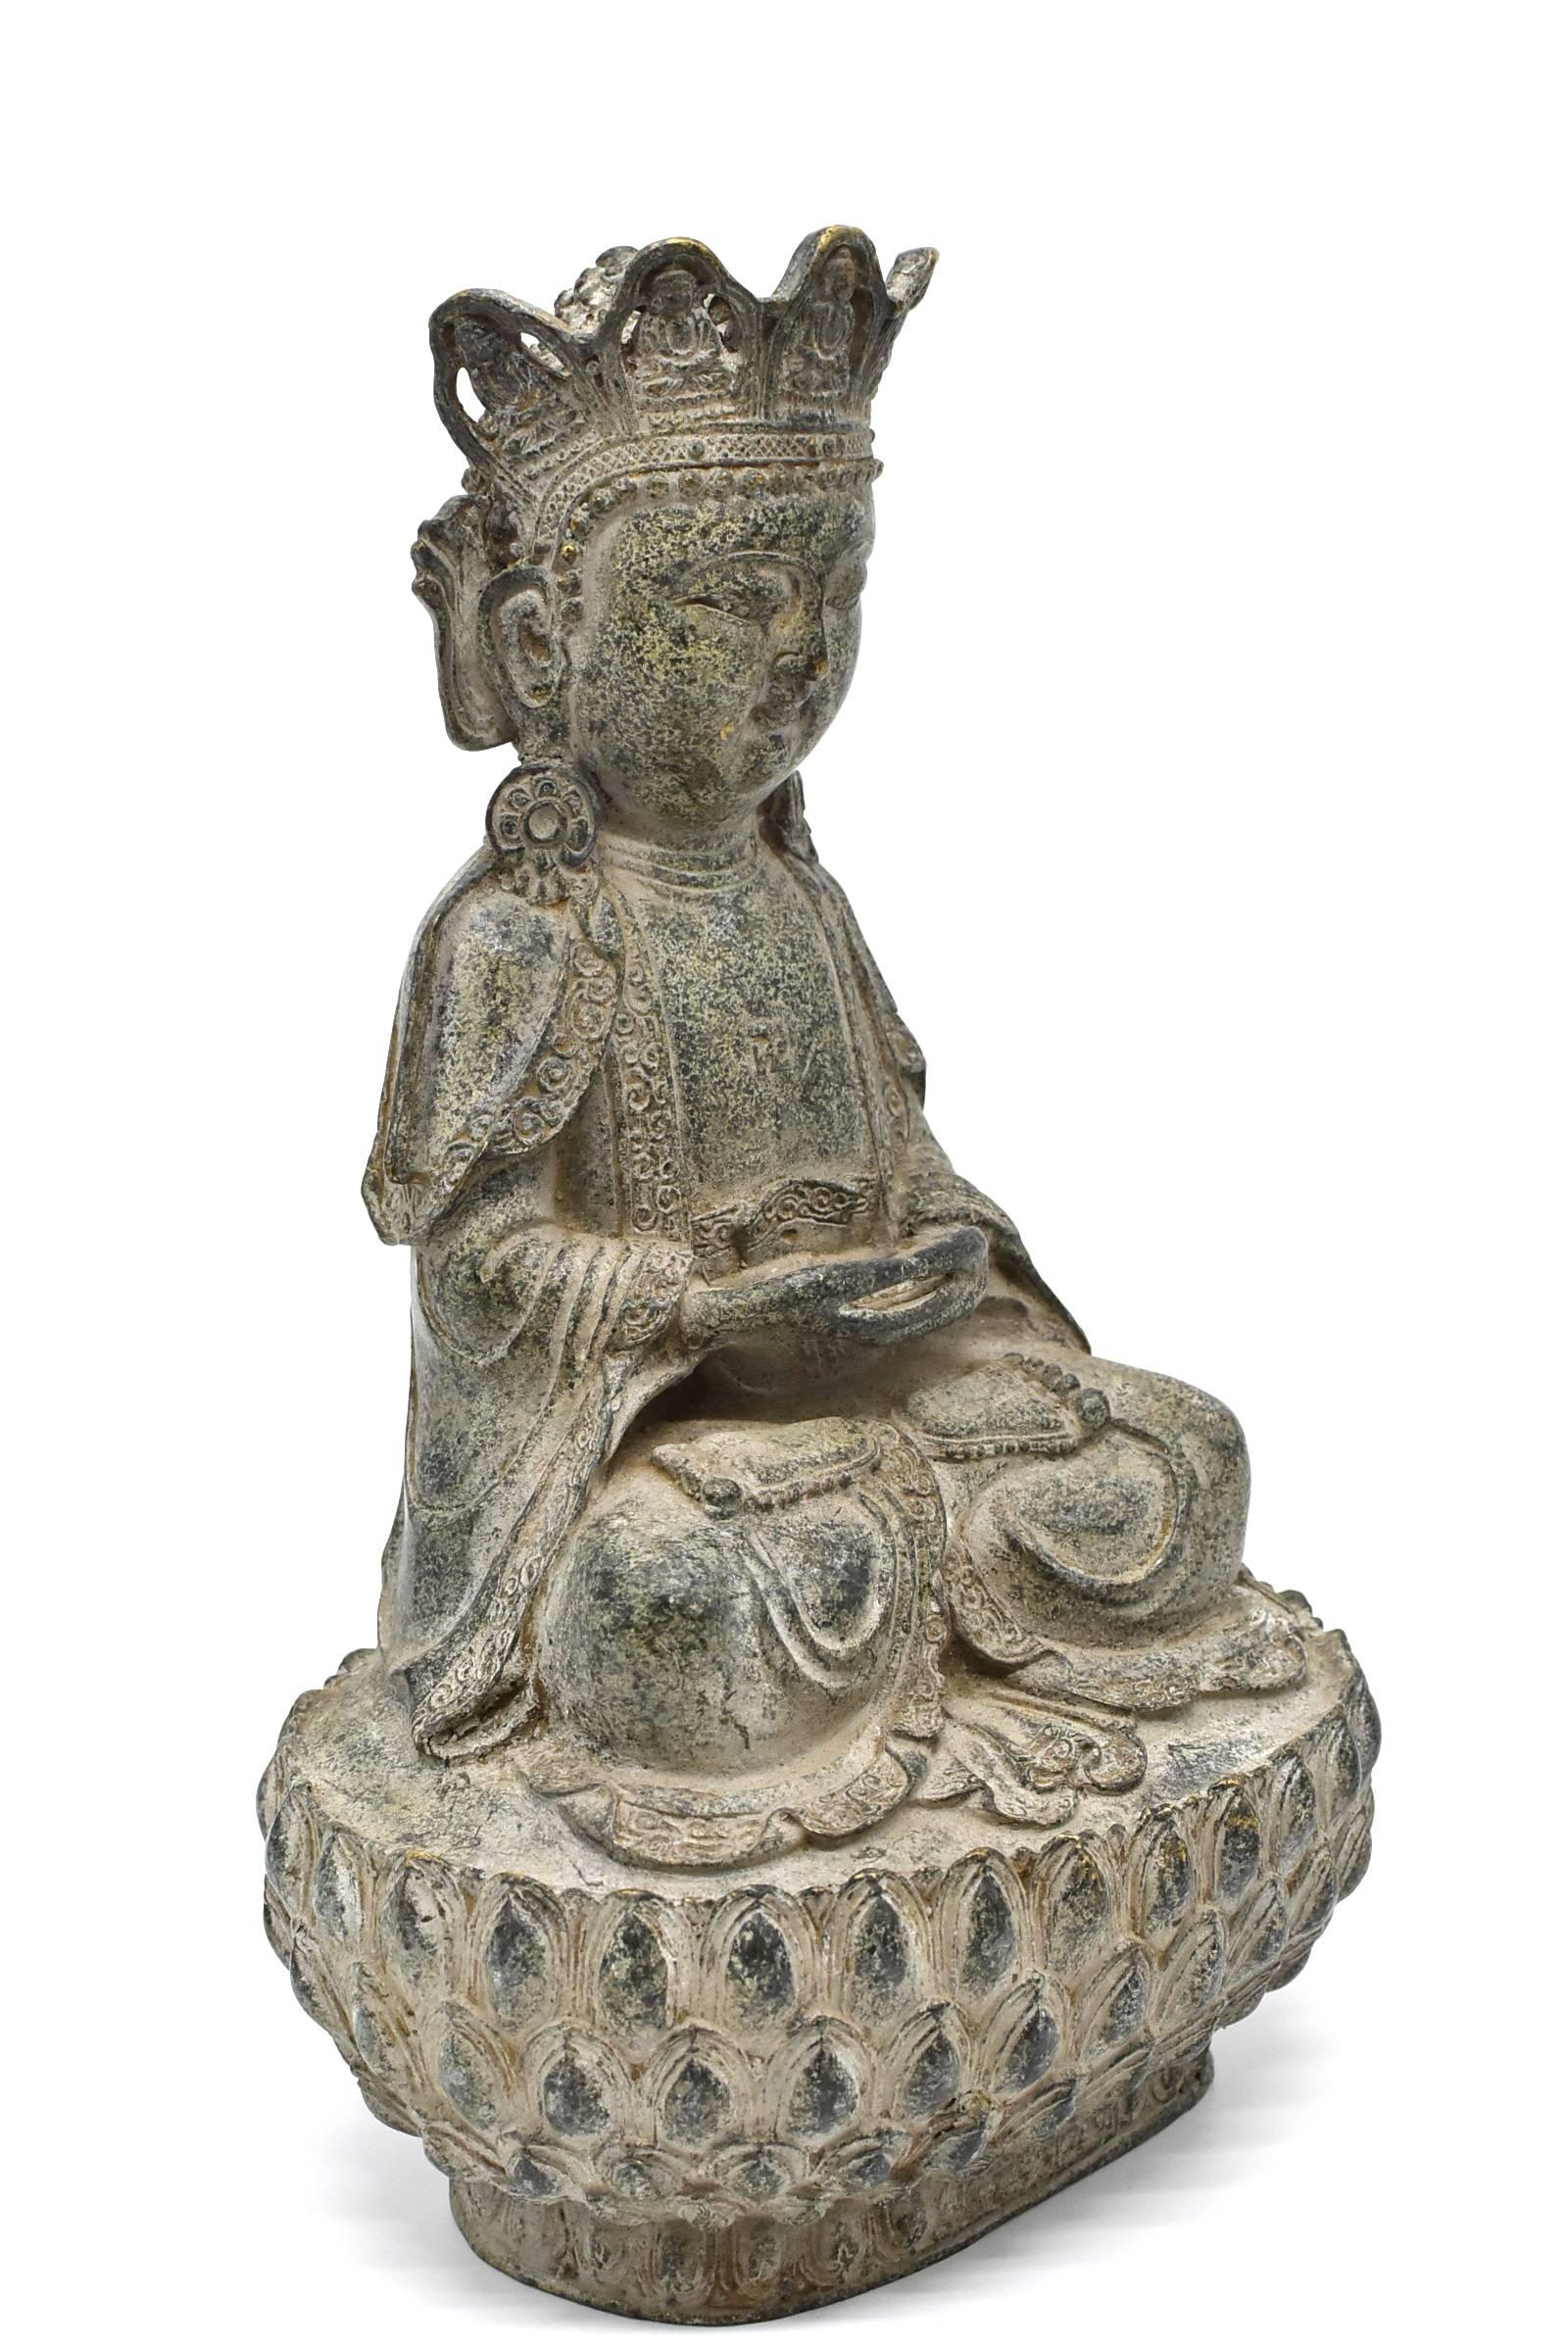 A beautiful bronze Buddha in the style of Ming dynasty Yong Le Period. Seated in dhyanasana on a double lotus base, the broad face with a serene expression, almond-shaped downcast eyes beneath high arched brows above pursed lips, all flanked by long